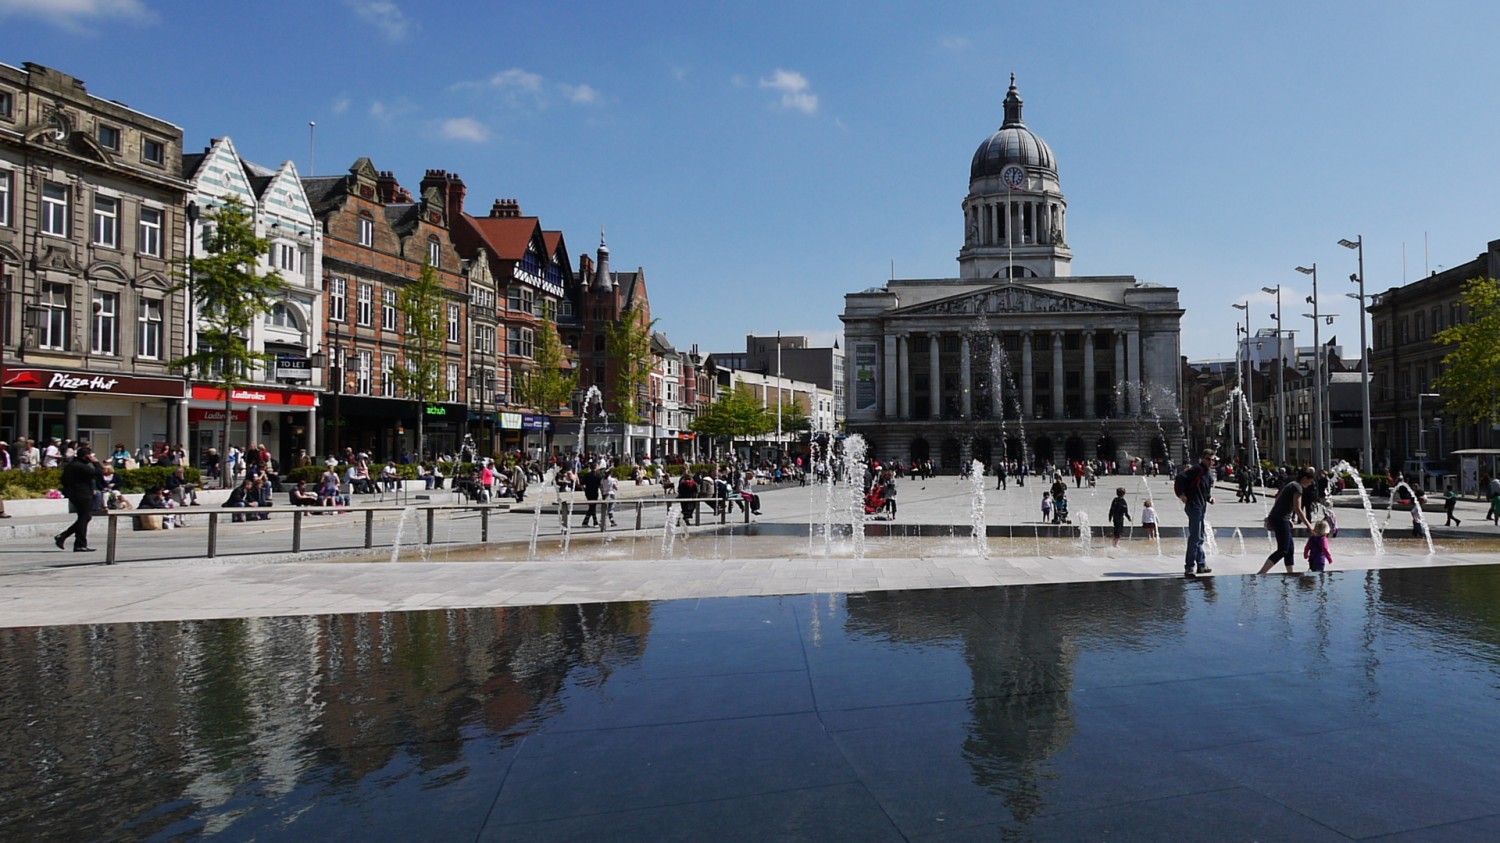 Building in square in Nottingham in the sun, fountains in front